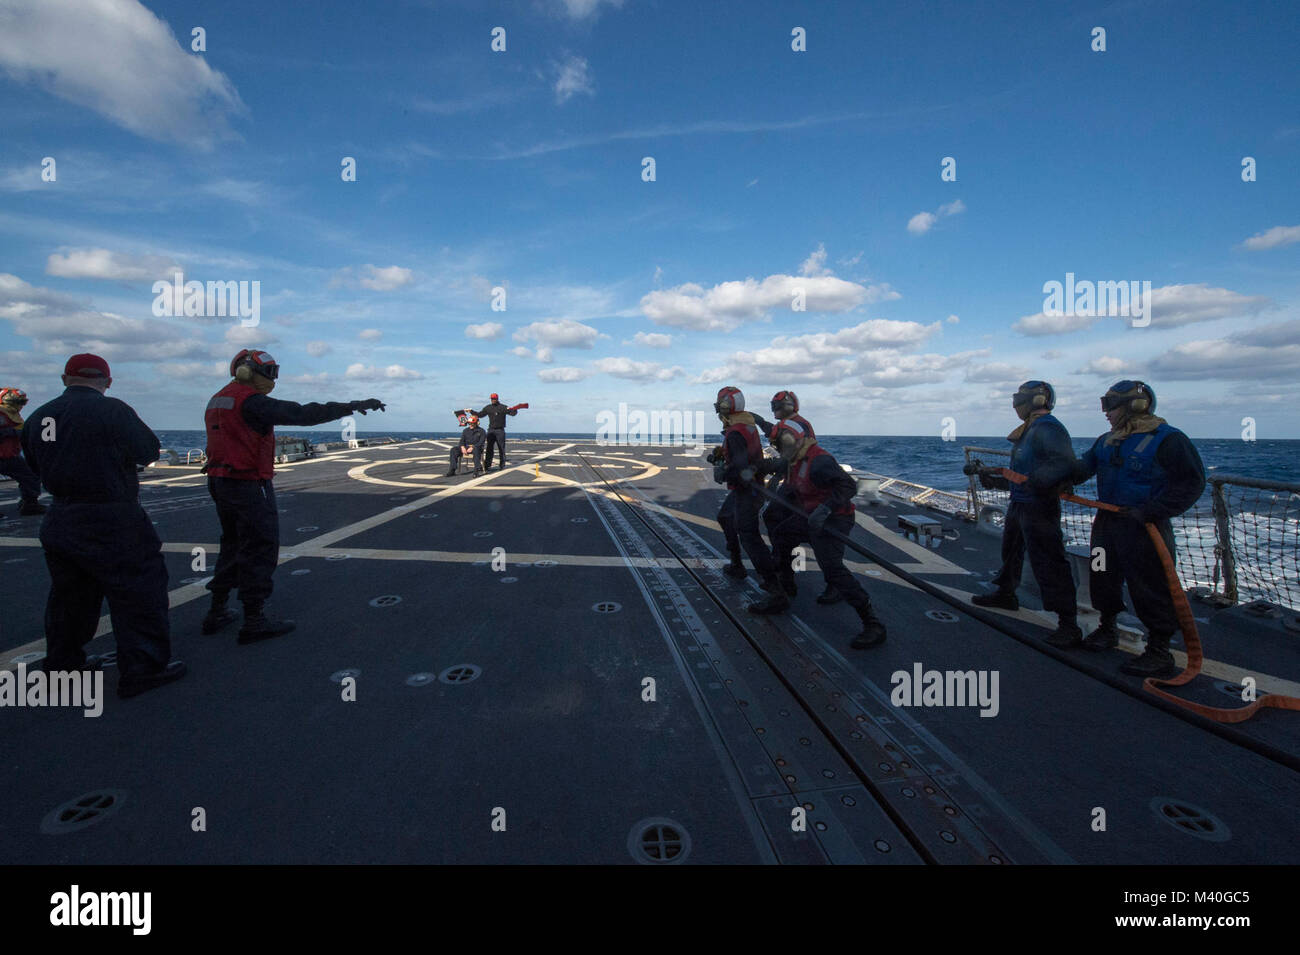 150131-N-ZE250-021 ATLANTIC OCEAN (Jan.31, 2015) - Sailors aboard Arleigh-Burke Class Guided Missile Destroyer USS Jason Dunham (DDG-109) conduct an aircraft firefighting drill on the flight deck while on deployment Jan. 31. USS Jason Dunham is currently underway in support of Operation Martillo, a joint operation with the U.S. Coast Guard and partner nations, within the 4th Fleet area of responsibility. (U.S. Navy photo by Mass Communication Specialist 3rd Class Weston Jones / Released) 150131-N-ZE250-021 by U.S. Naval Forces Southern Command  U.S. 4th Fleet Stock Photo